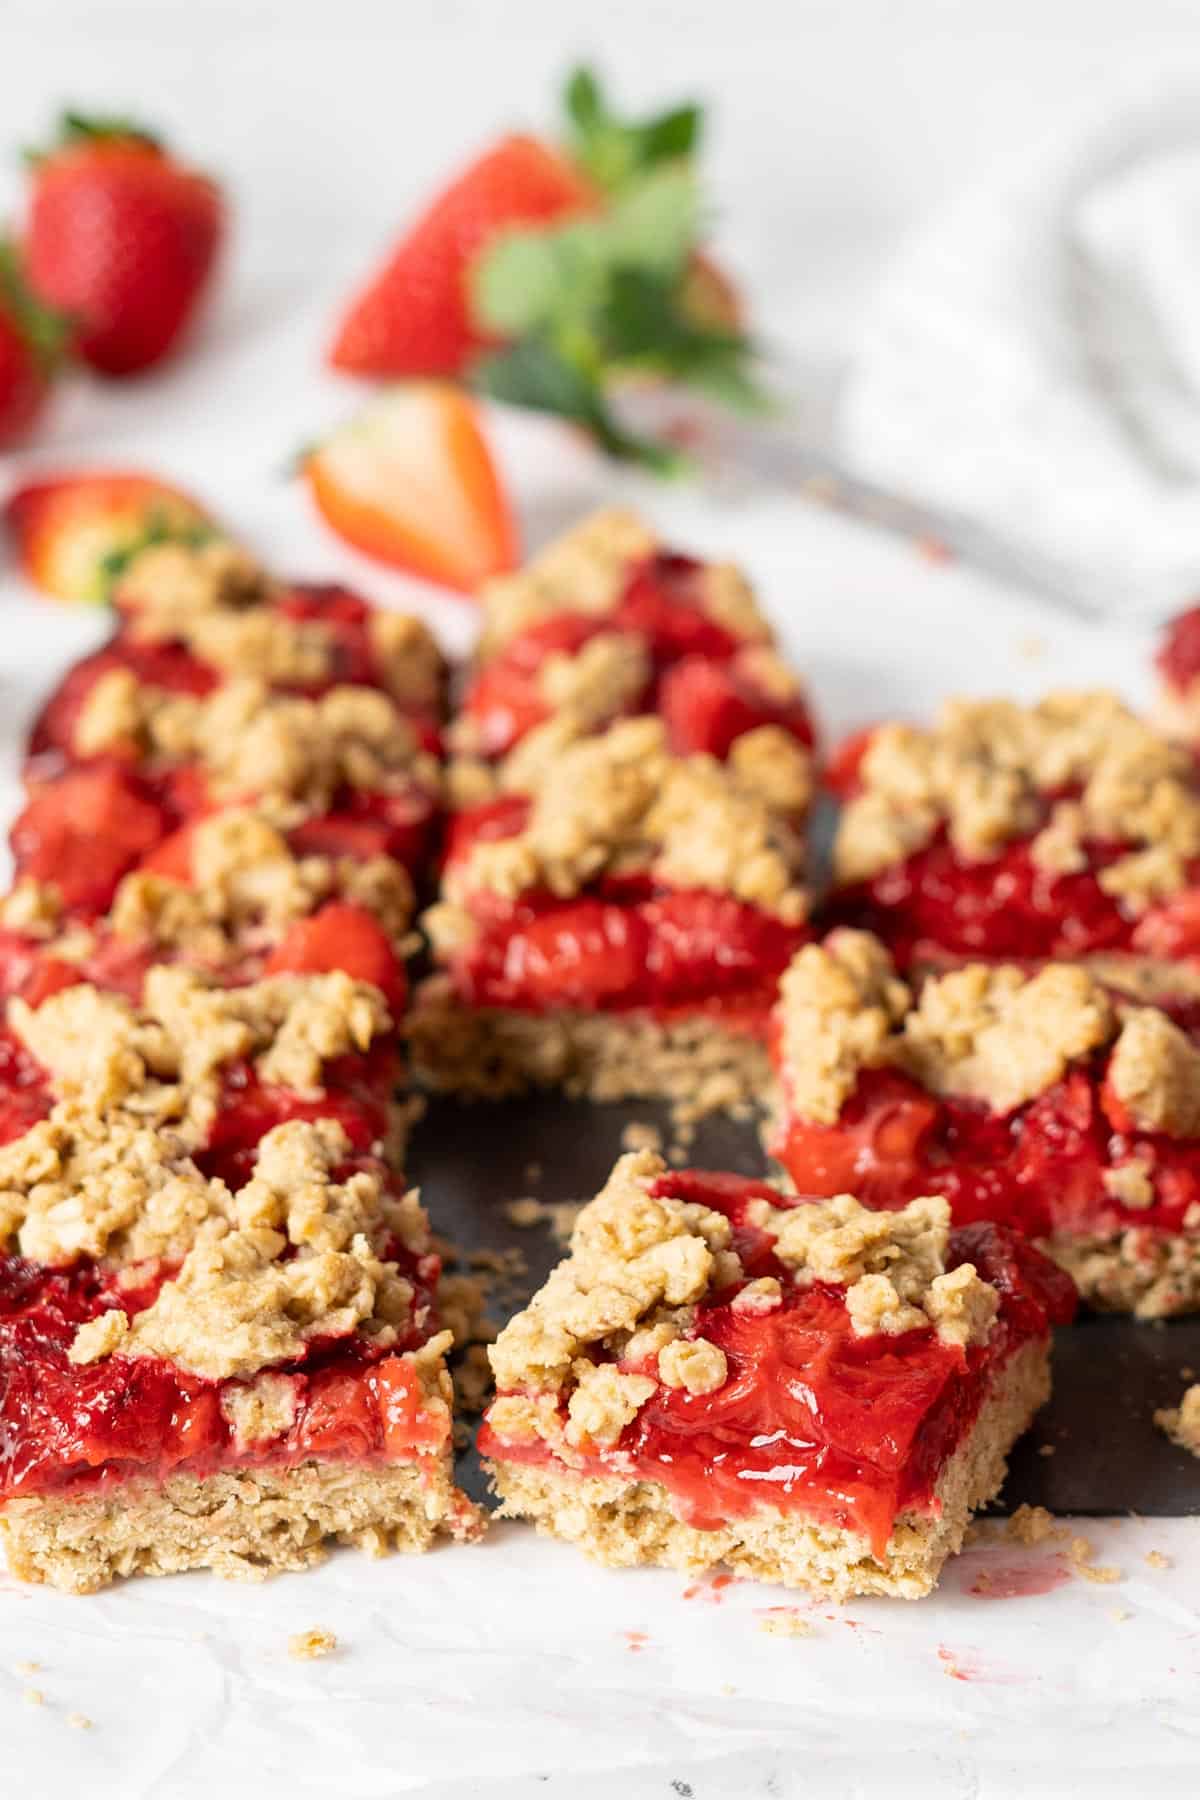 Sliced healthy strawberry oatmeal bars view from front